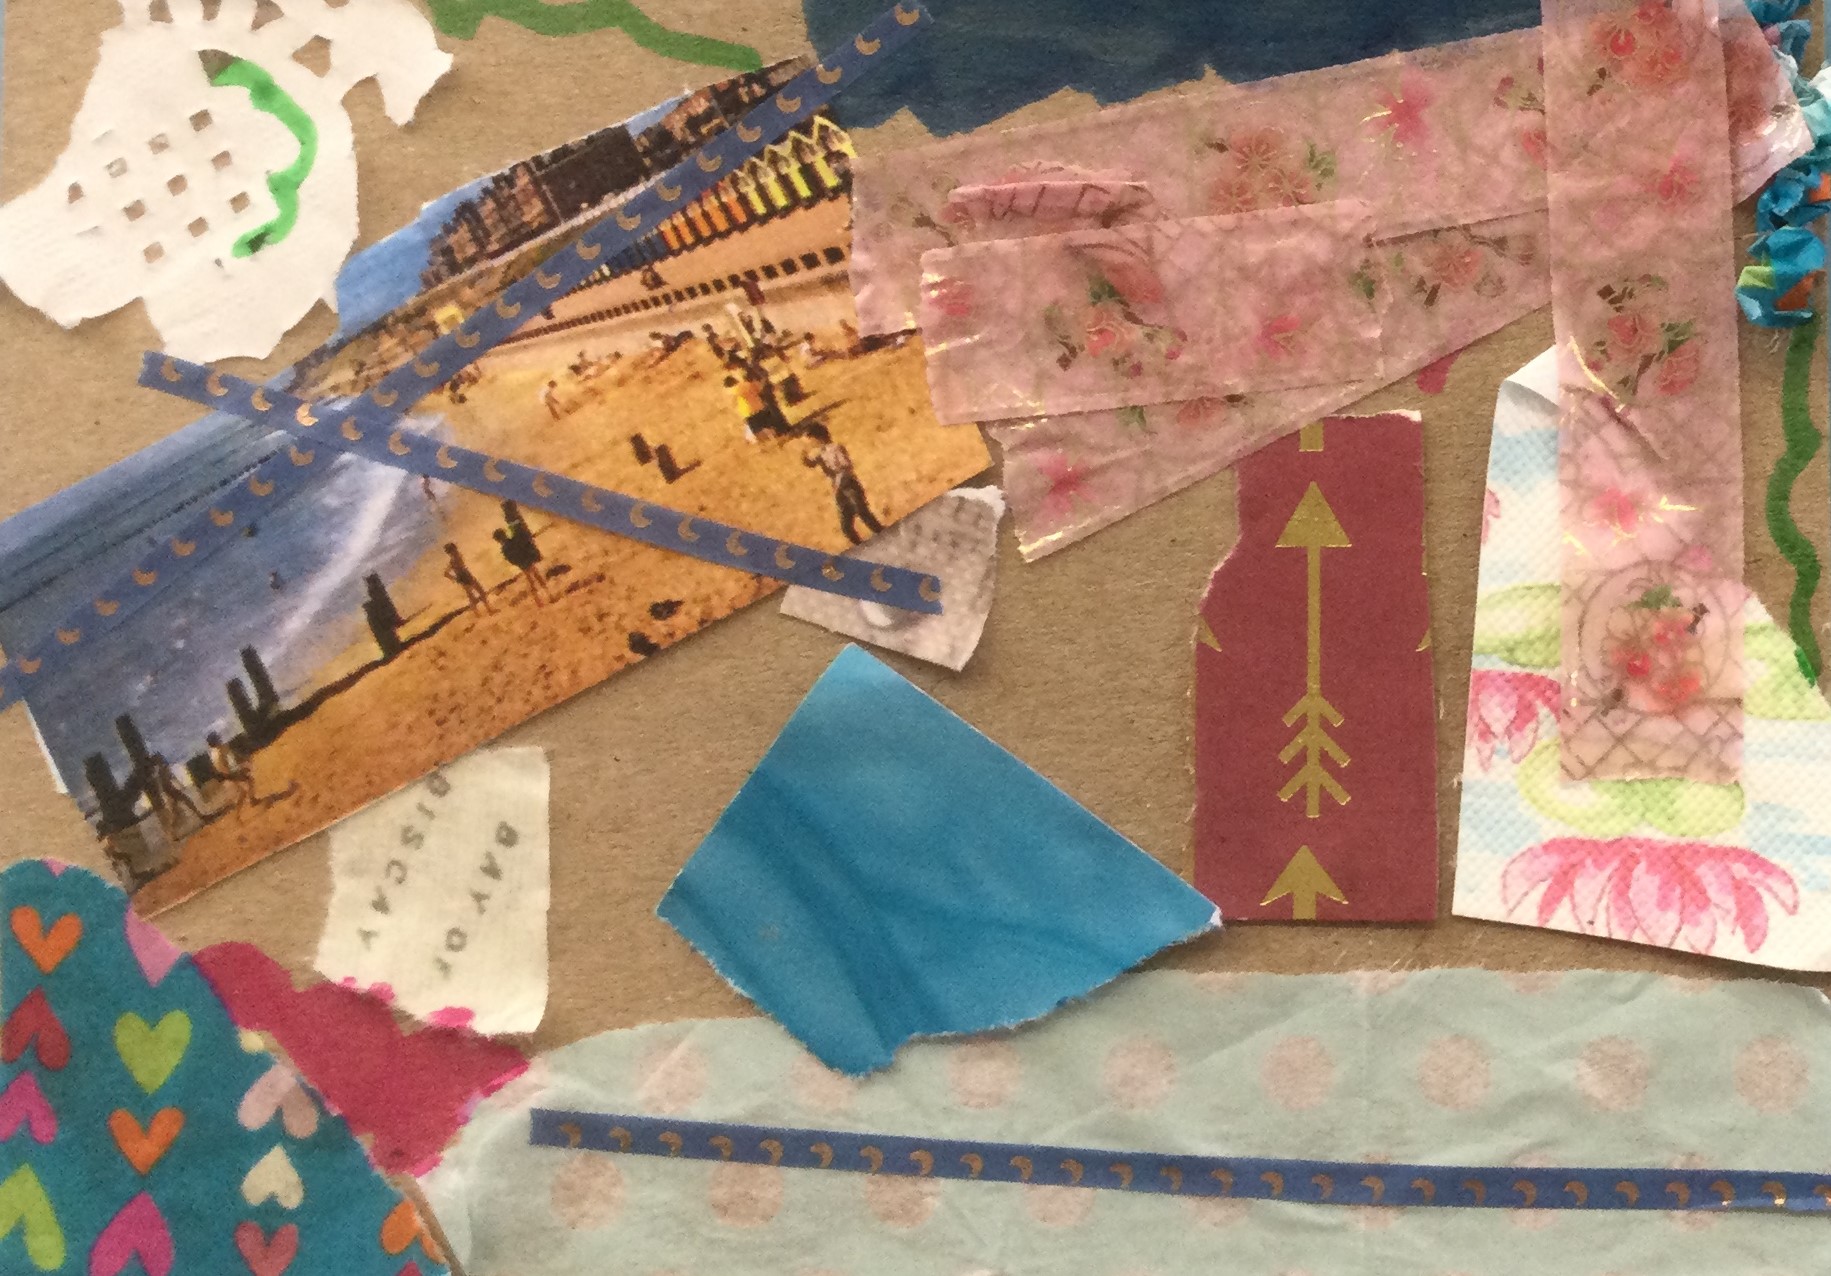 A collaged postcard decorated with many little bits of paper, including a snippet of a vintage postcard showing people on a sunny beach, scraps of blue and pink papers, a piece with text reading Bay of Biscay and strips of thin blue and gold tape. There is also a piece of reddish brown paper with a gold arrow pointing to the top of the card